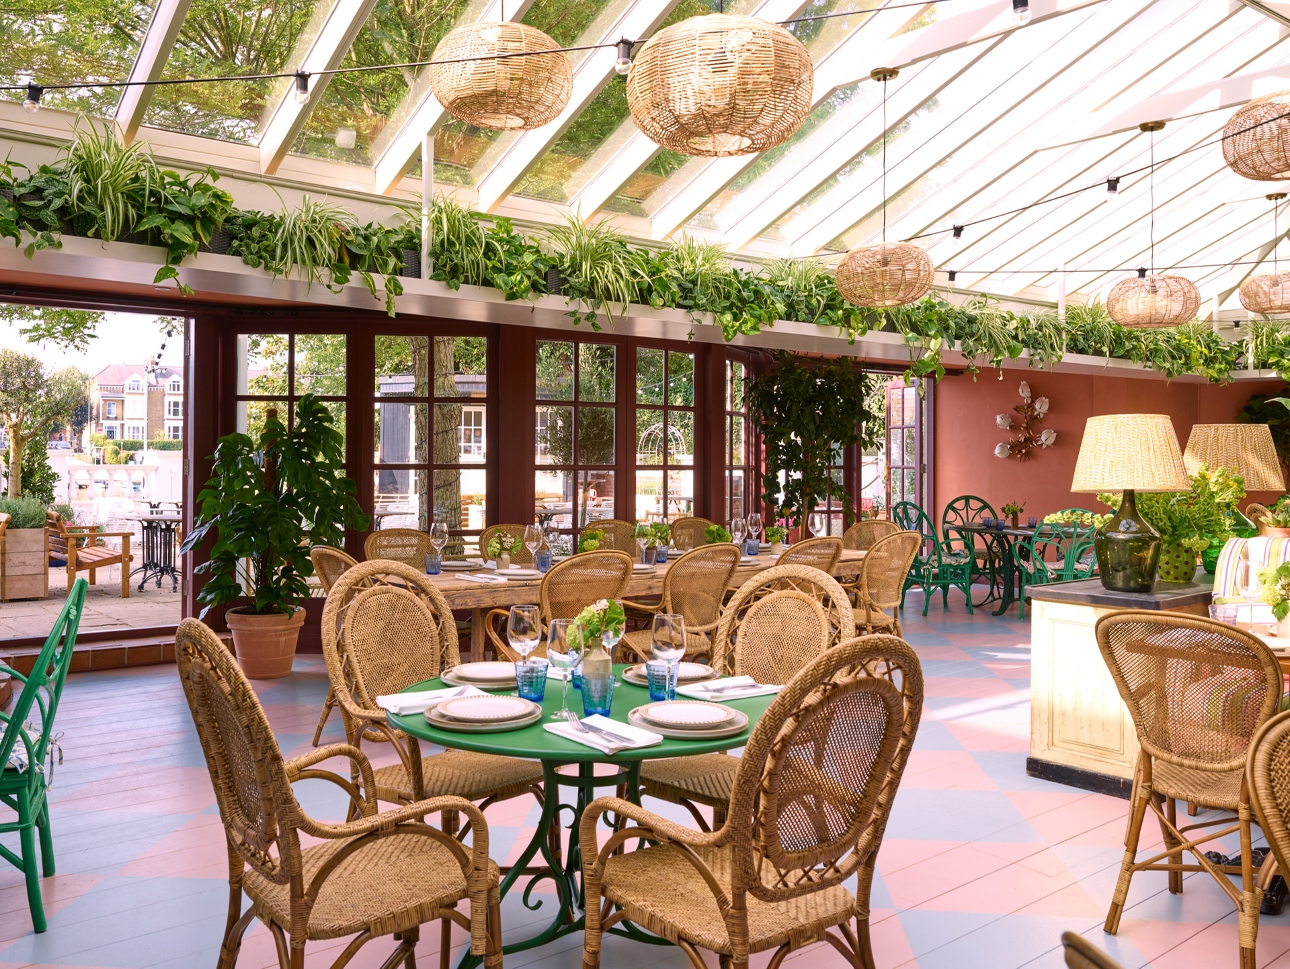 conservatory-style restaurant with wicker tables and chairs